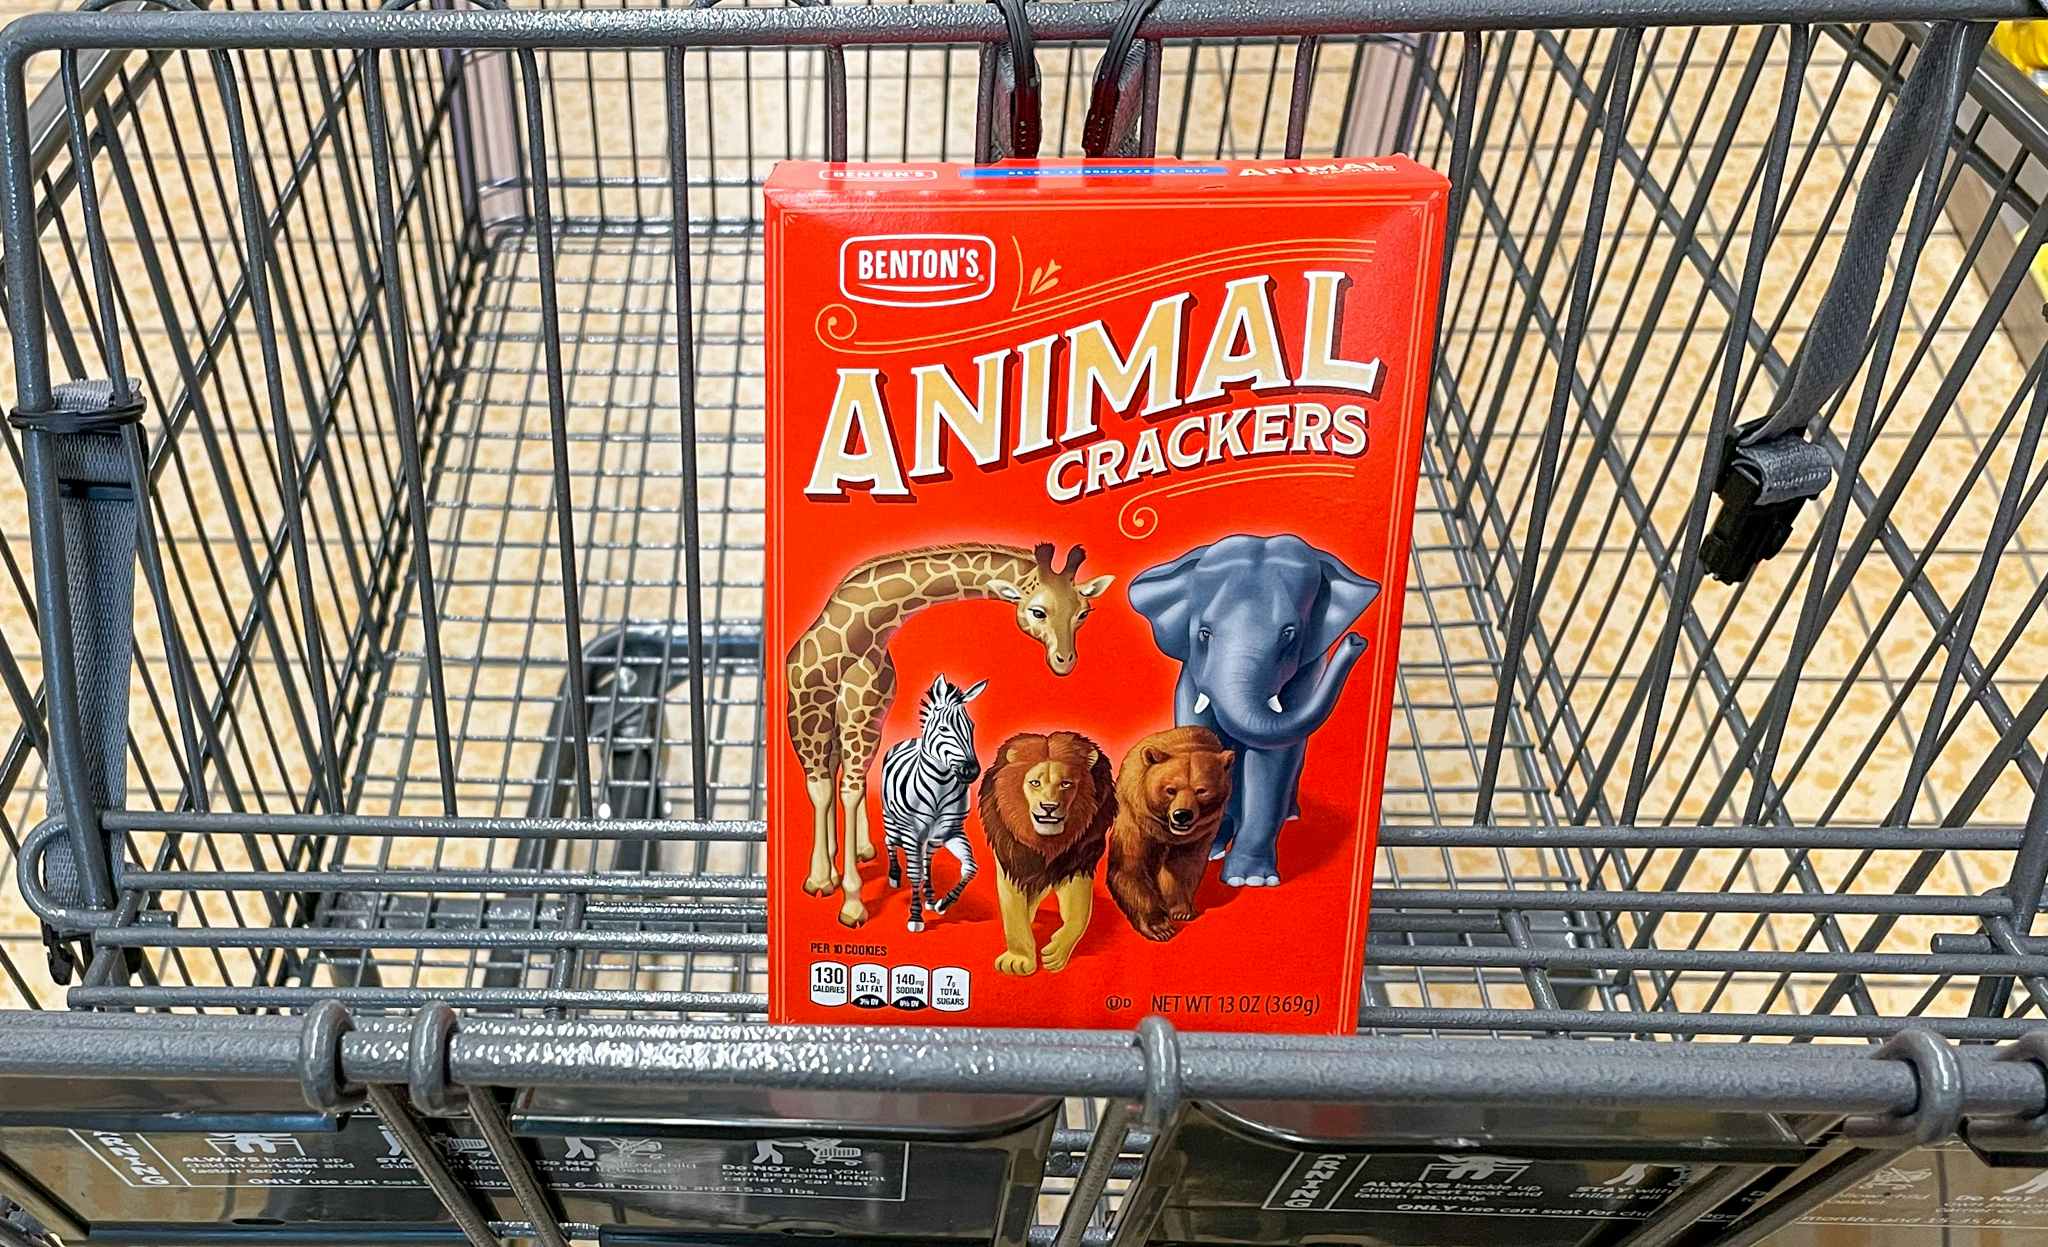 benton's animal crackers in a box in a cart at aldi